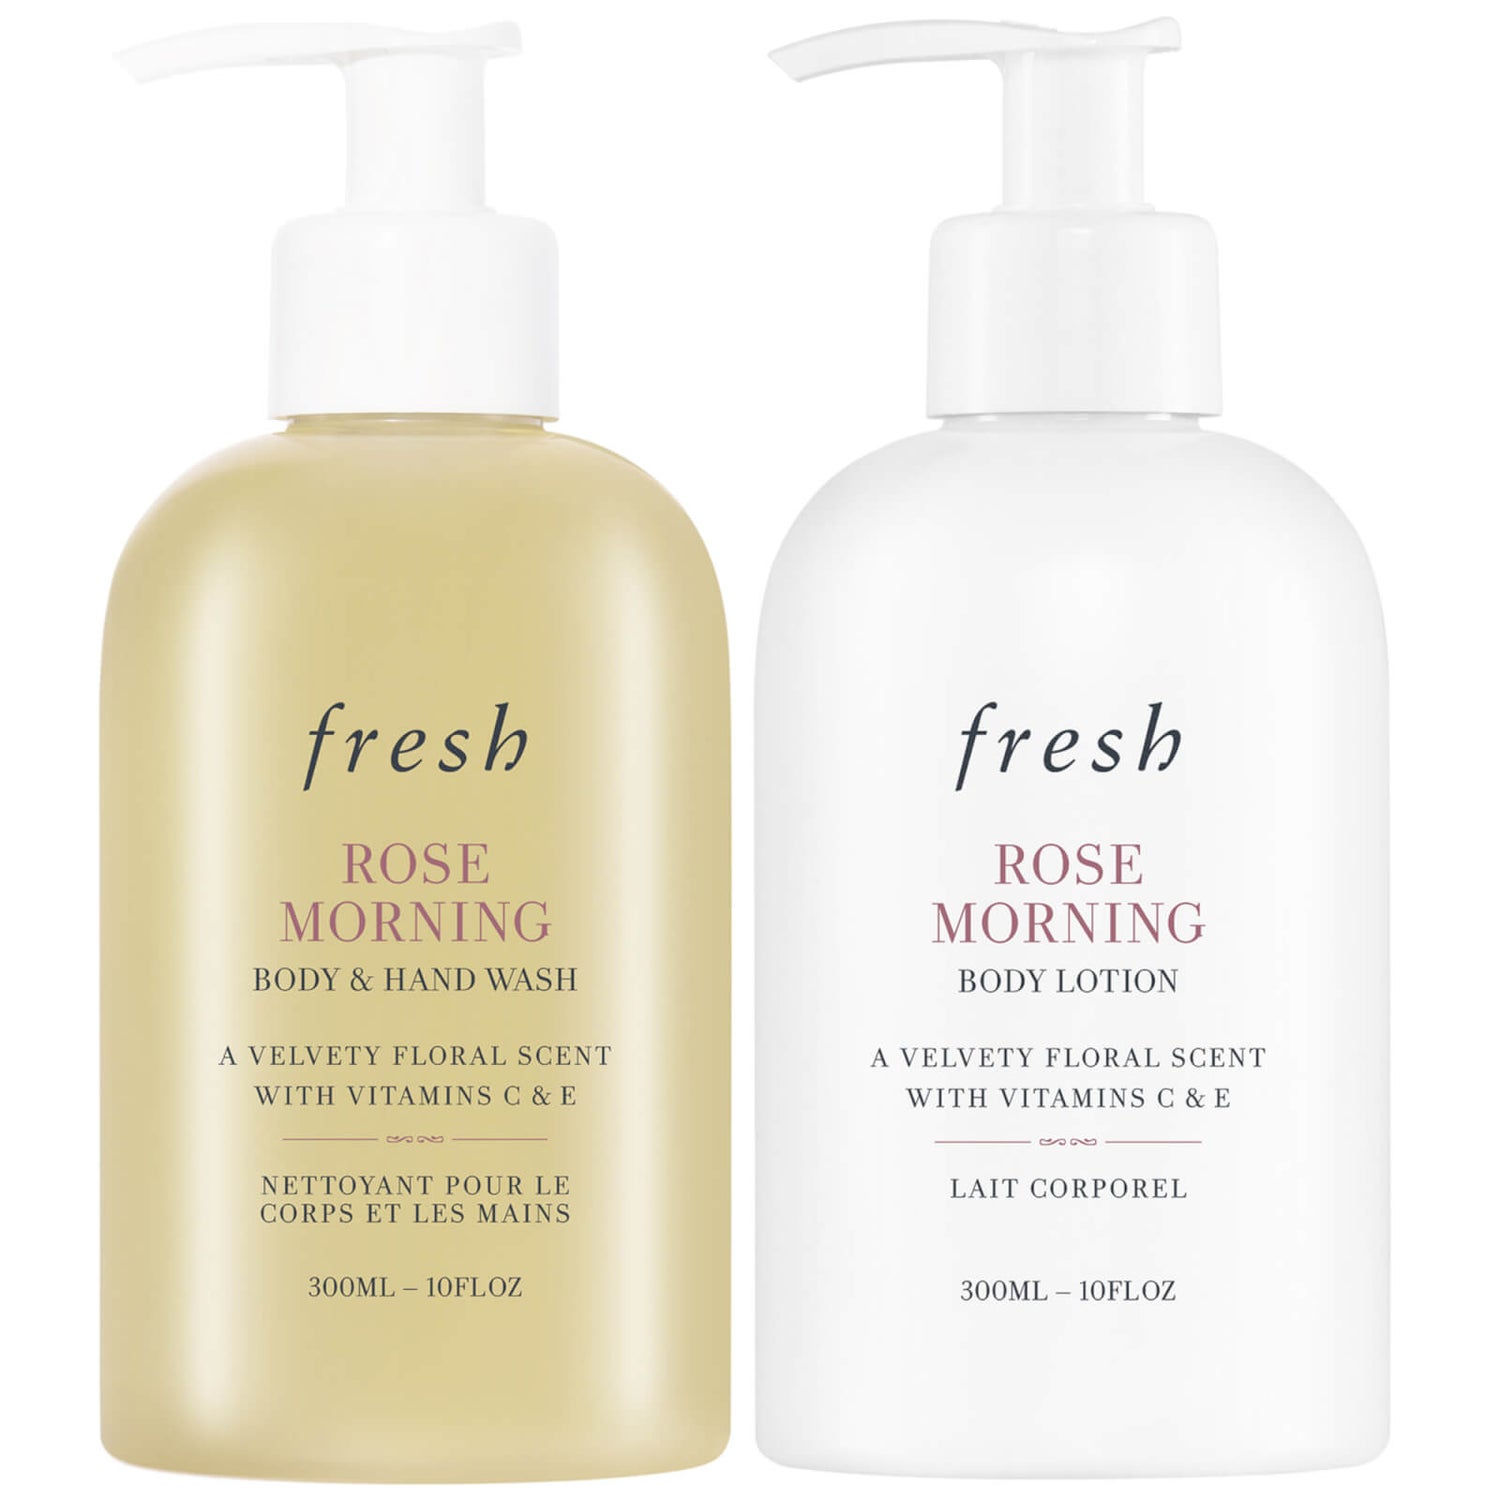 Fresh Rose Morning Body Lotion and Body and Hand Wash 300ml Duo (Worth £51.00)